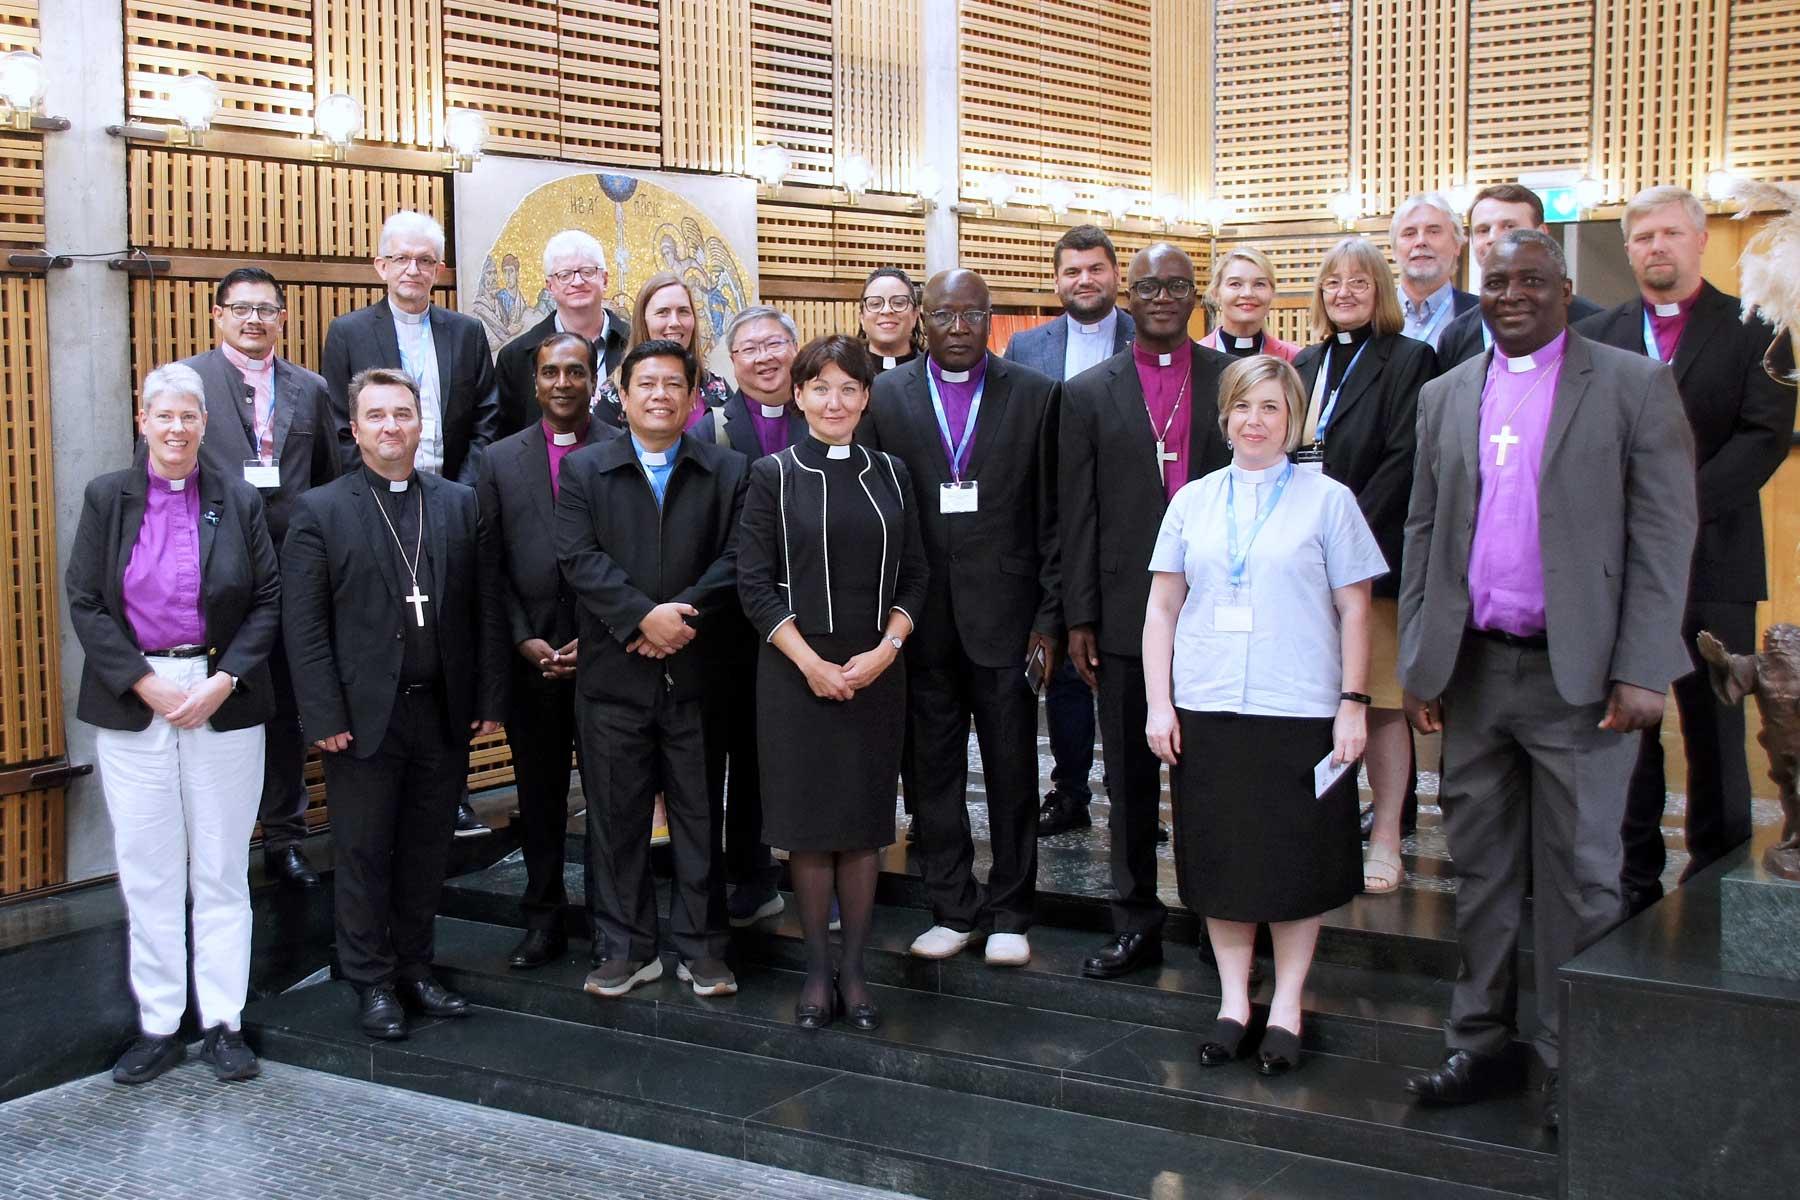 (From right): Bishop Deddy Fajar Purba, Simalungun Protestant Christian Church (GKPS), Indonesia; First Vice-President Odair Airton Braun, Evangelical Church of the Lutheran Confession in Brazil; Bishop Laurie Jungling, Montana Synod, Evangelical Lutheran Church in America; Bishop Steven Lawrence, Evangelical Lutheran Church in Malaysia; and Presiding Bishop Kenneth Sibanda, Evangelical Lutheran Church in Zimbabwe. Photo: LWF/ C. Kästner-Meyer